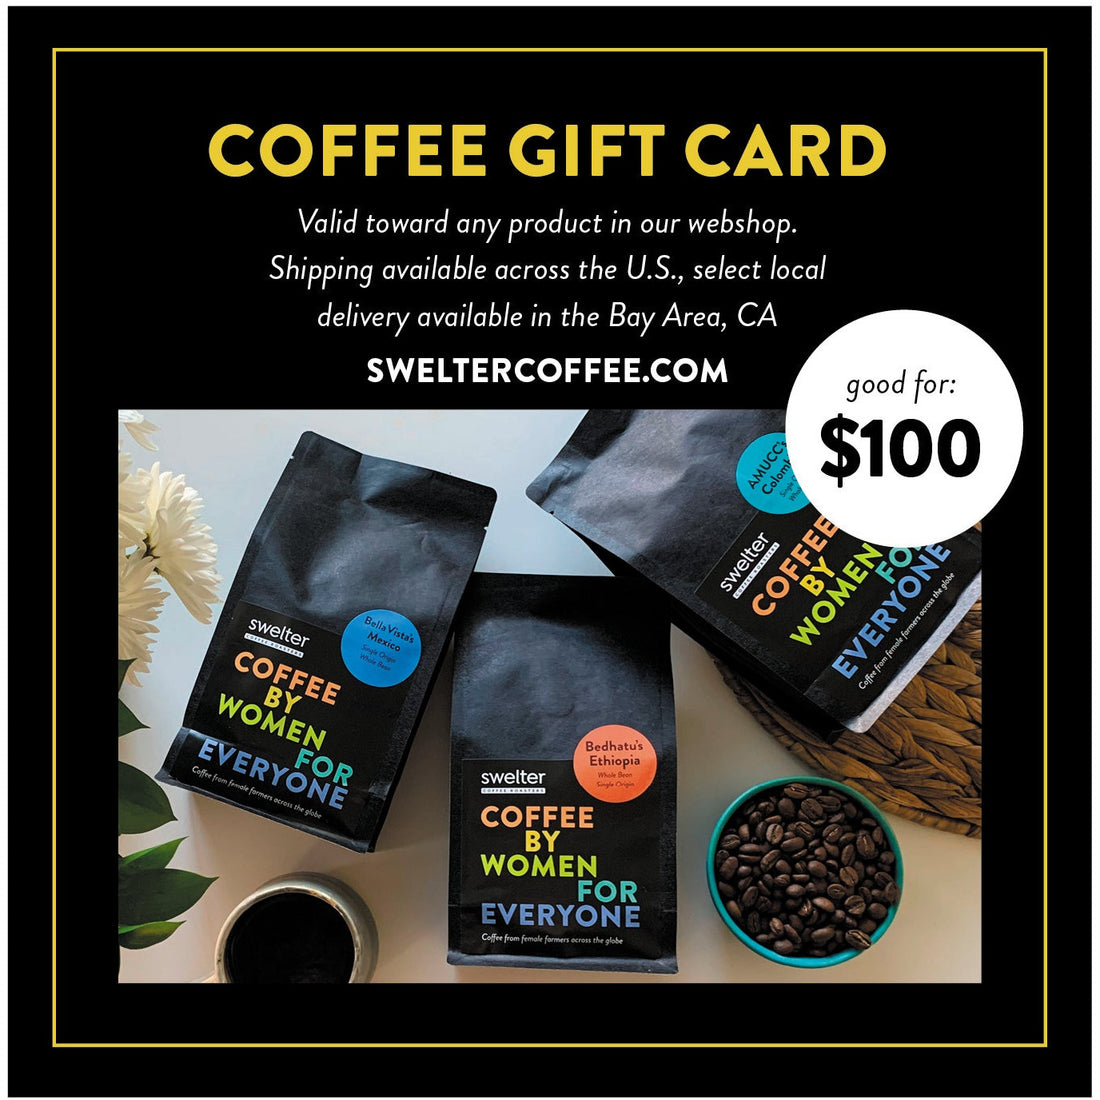 Swelter Coffee gift card